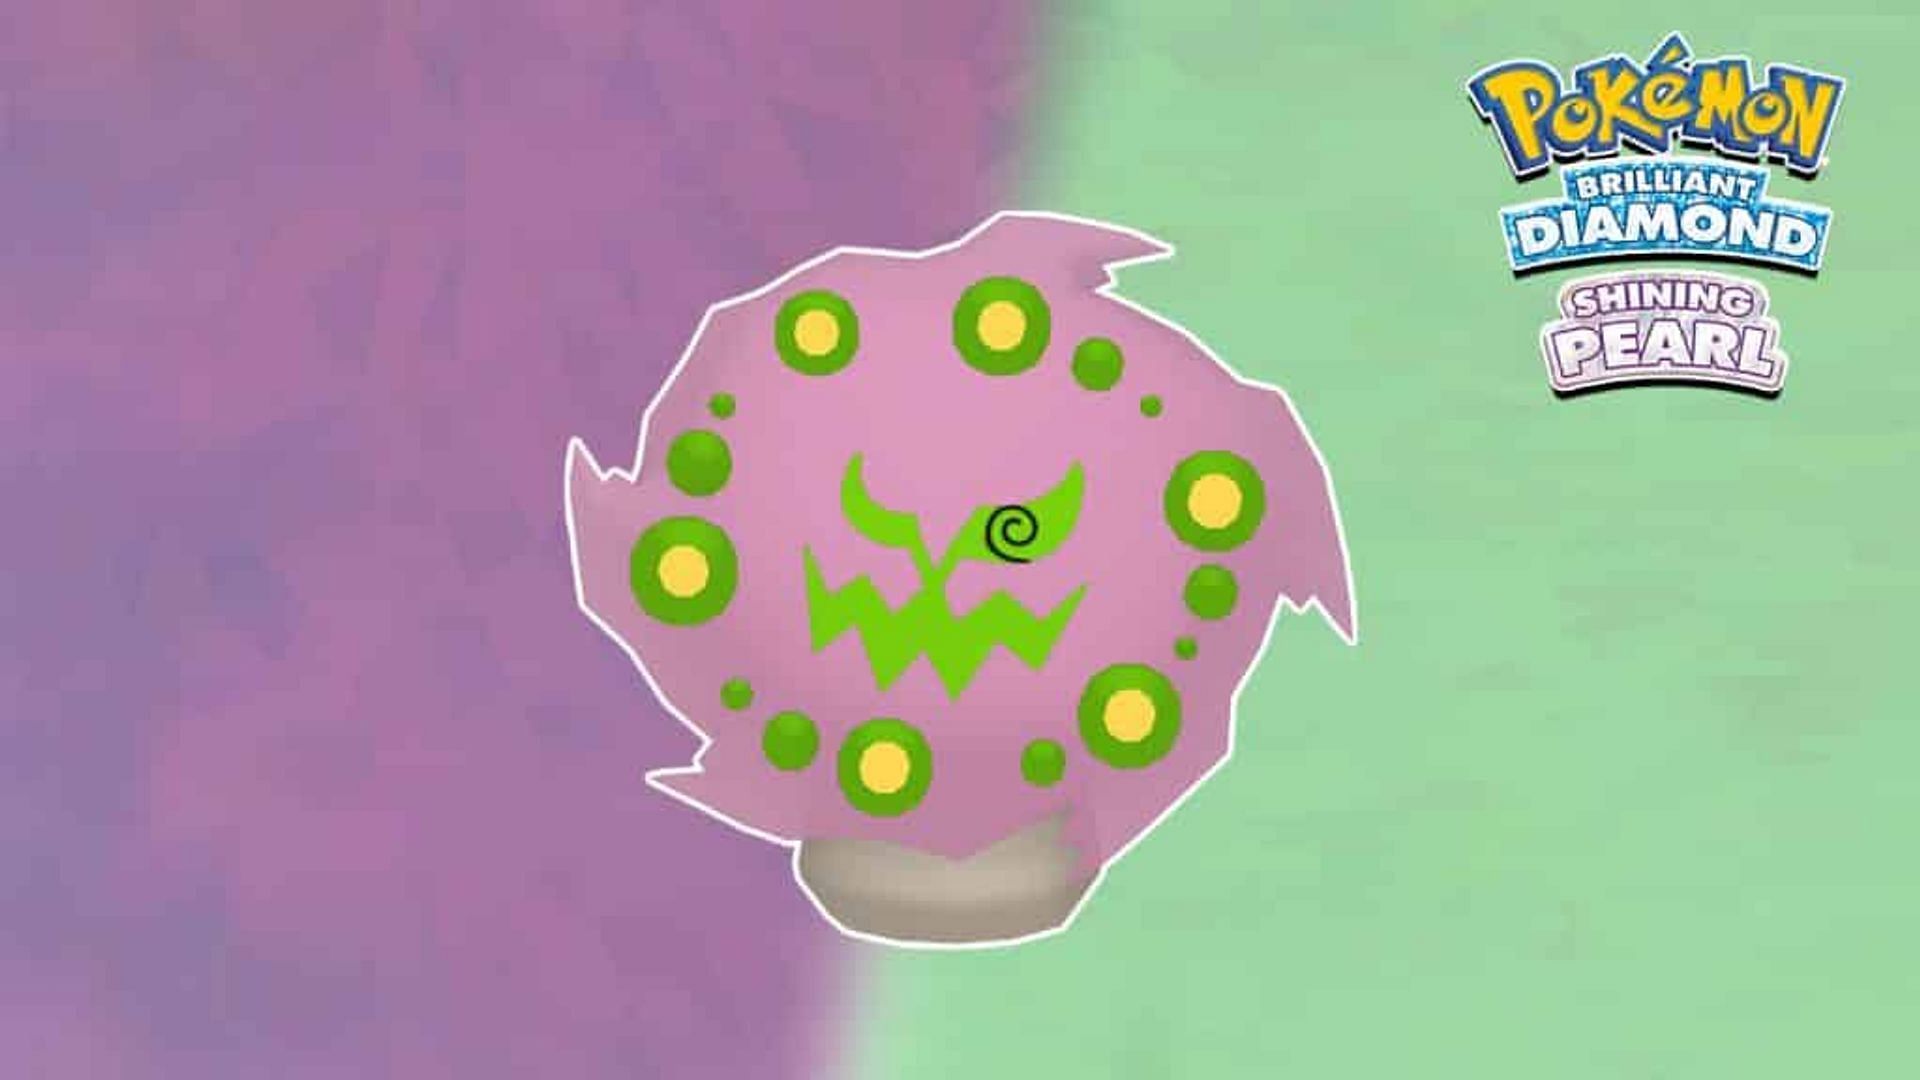 19 Facts About Spiritomb 